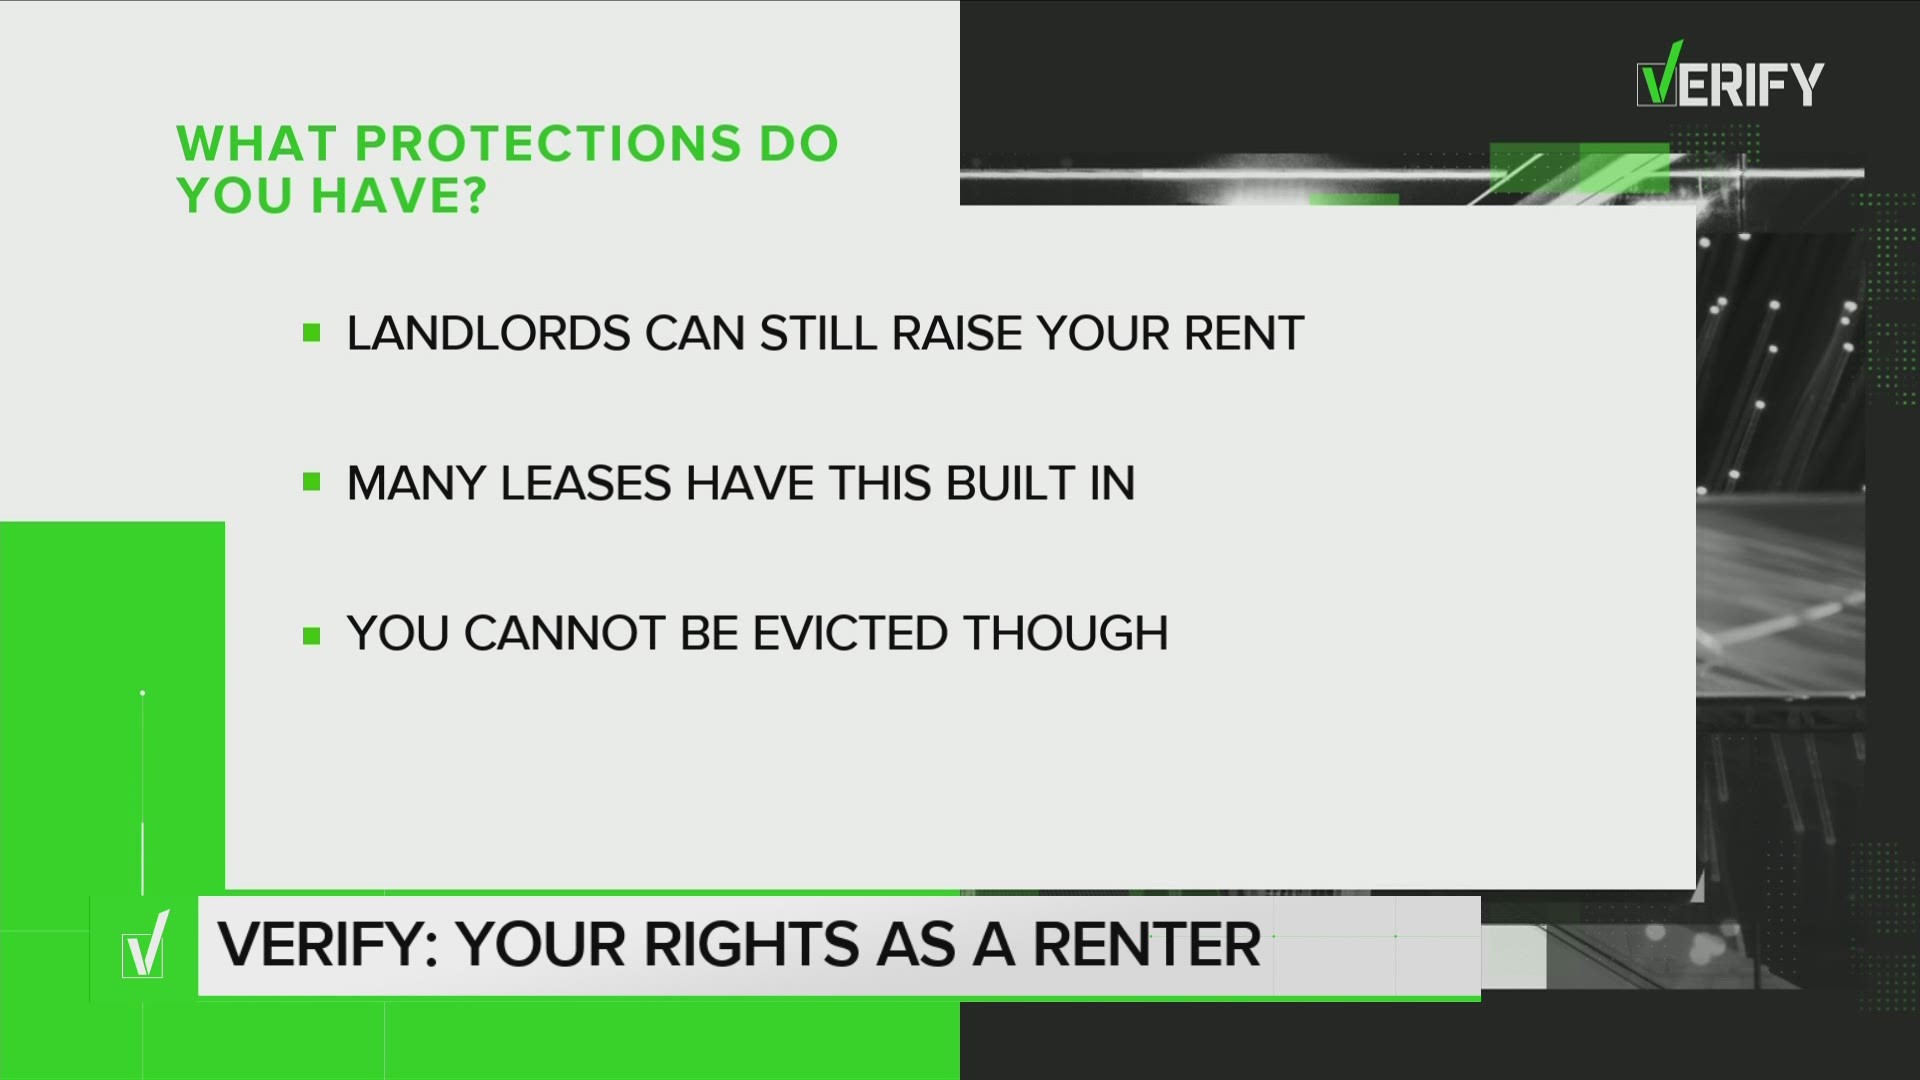 Local 5 is separating fact from fiction about your rights as a tenant during the COVID-19 pandemic.